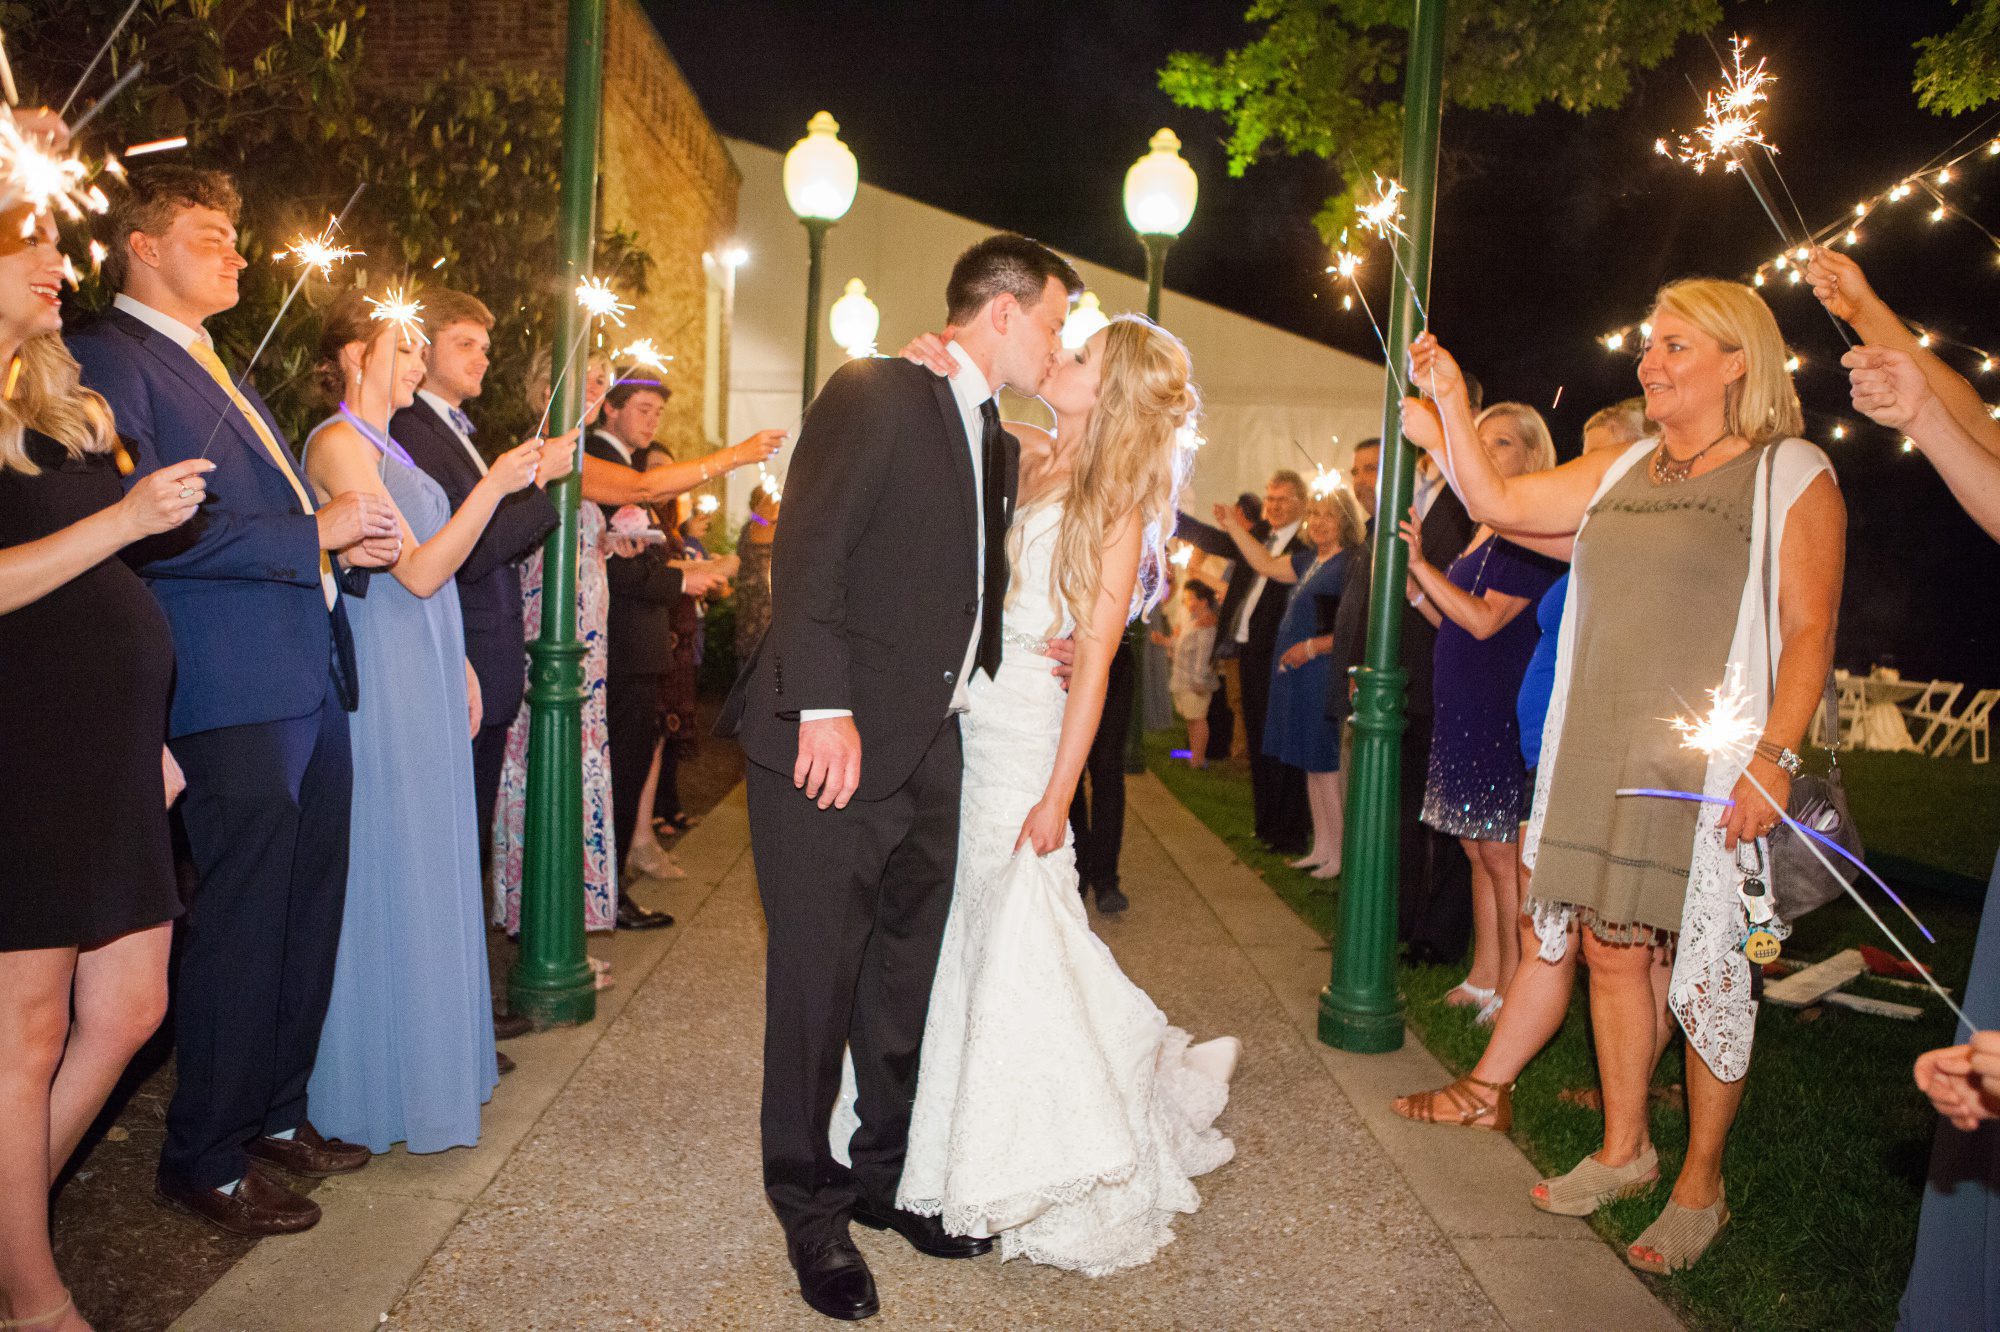 Bride and groom kiss at sparkler exit Riverwood Mansion in Nashville, Tennessee. Photography by Krista Lee.